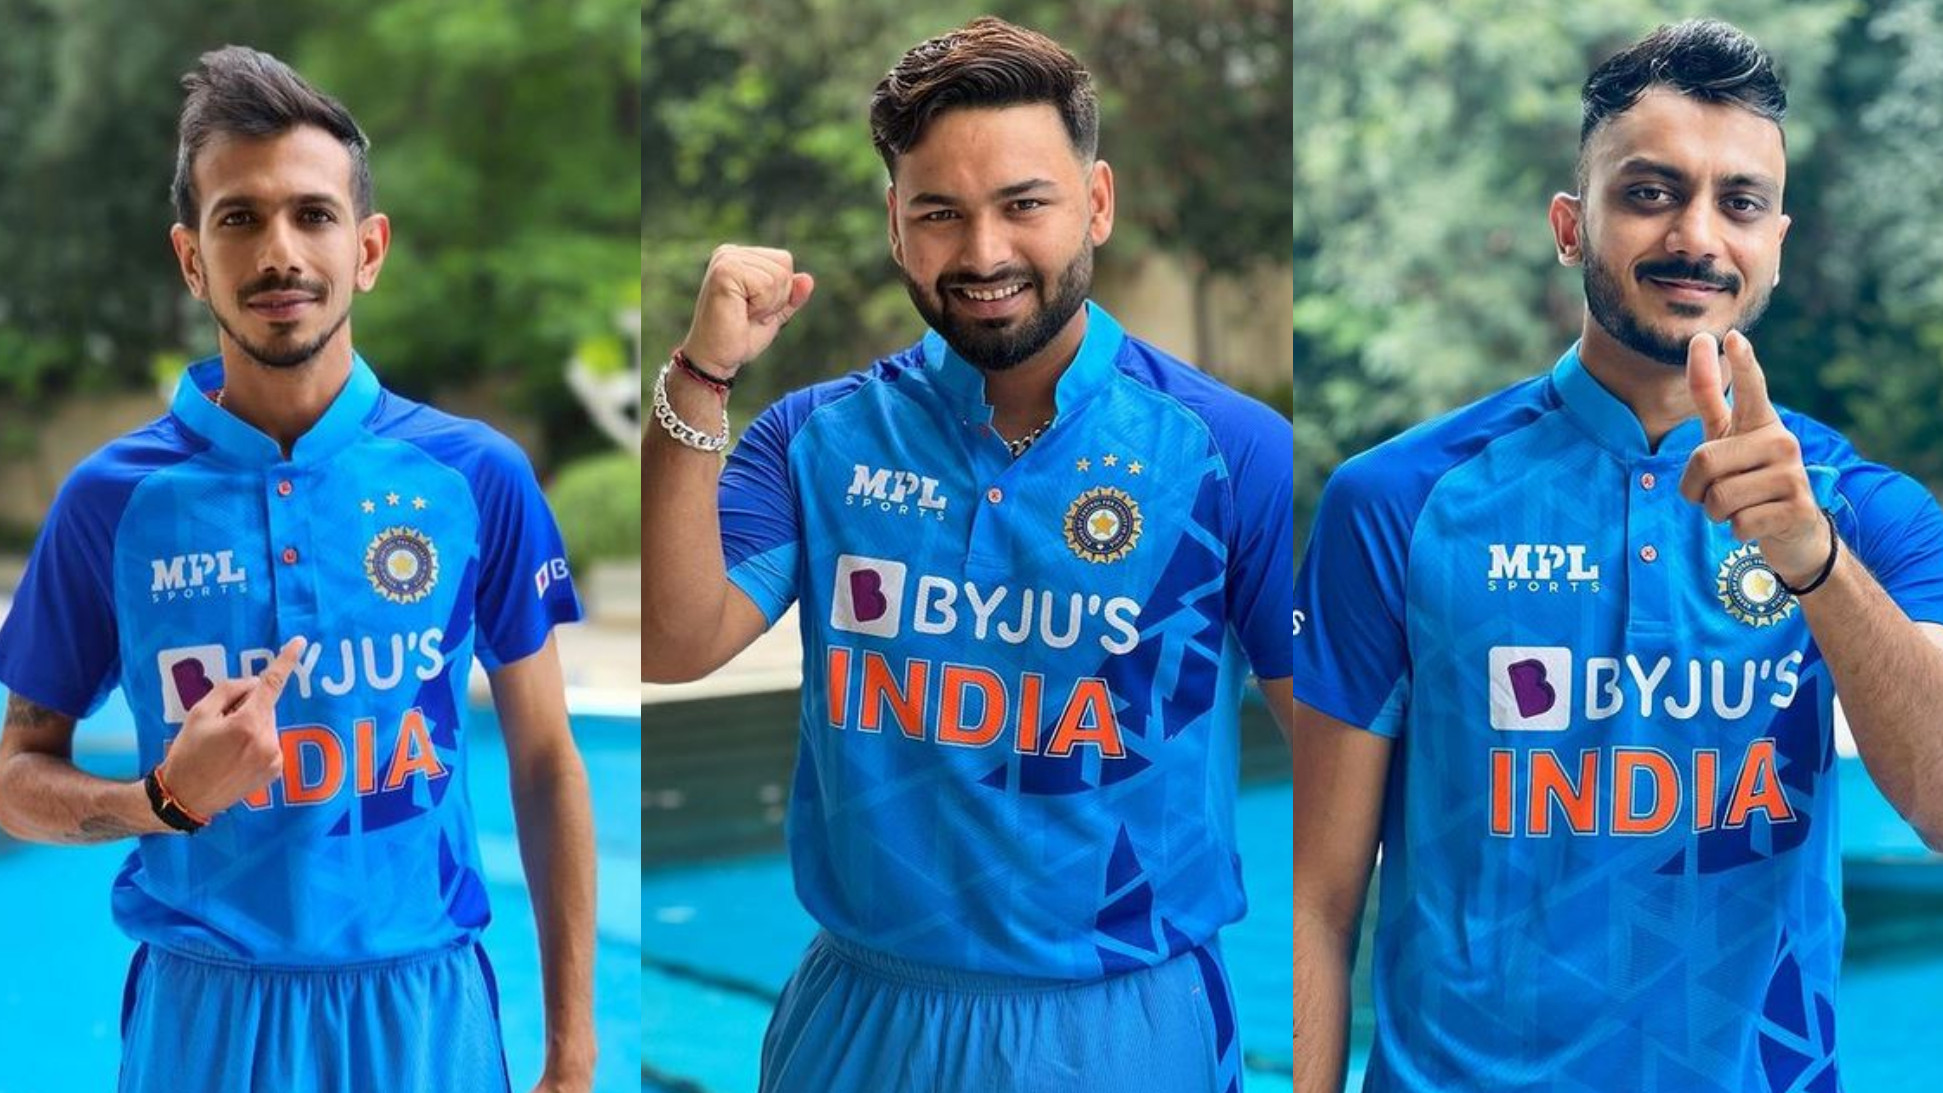 IND v AUS 2022: PICS- Rishabh Pant, Yuzvendra Chahal and other Indian players pose in new T20 jersey